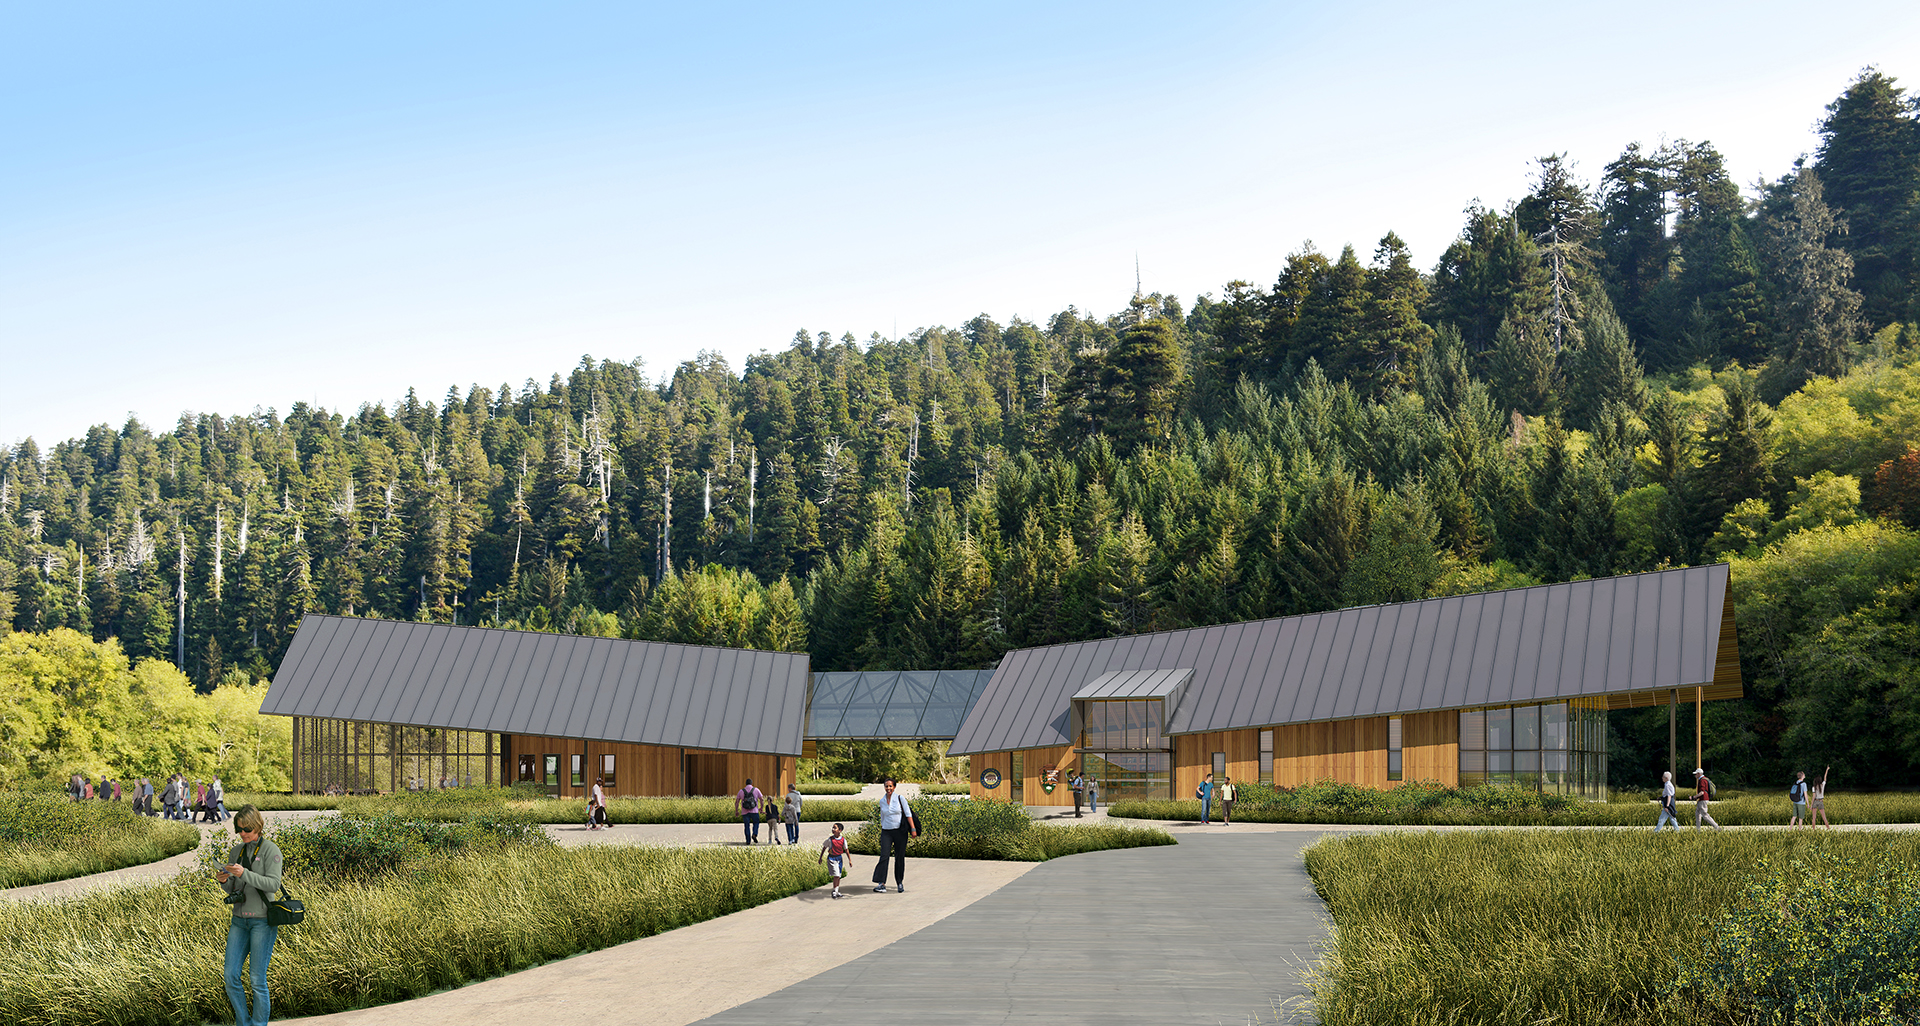 Exterior Rendering Of the Redwood Visitor Center Designed By Siegel & Strain Architects And Recipient Of A 2021 American Architecture Award